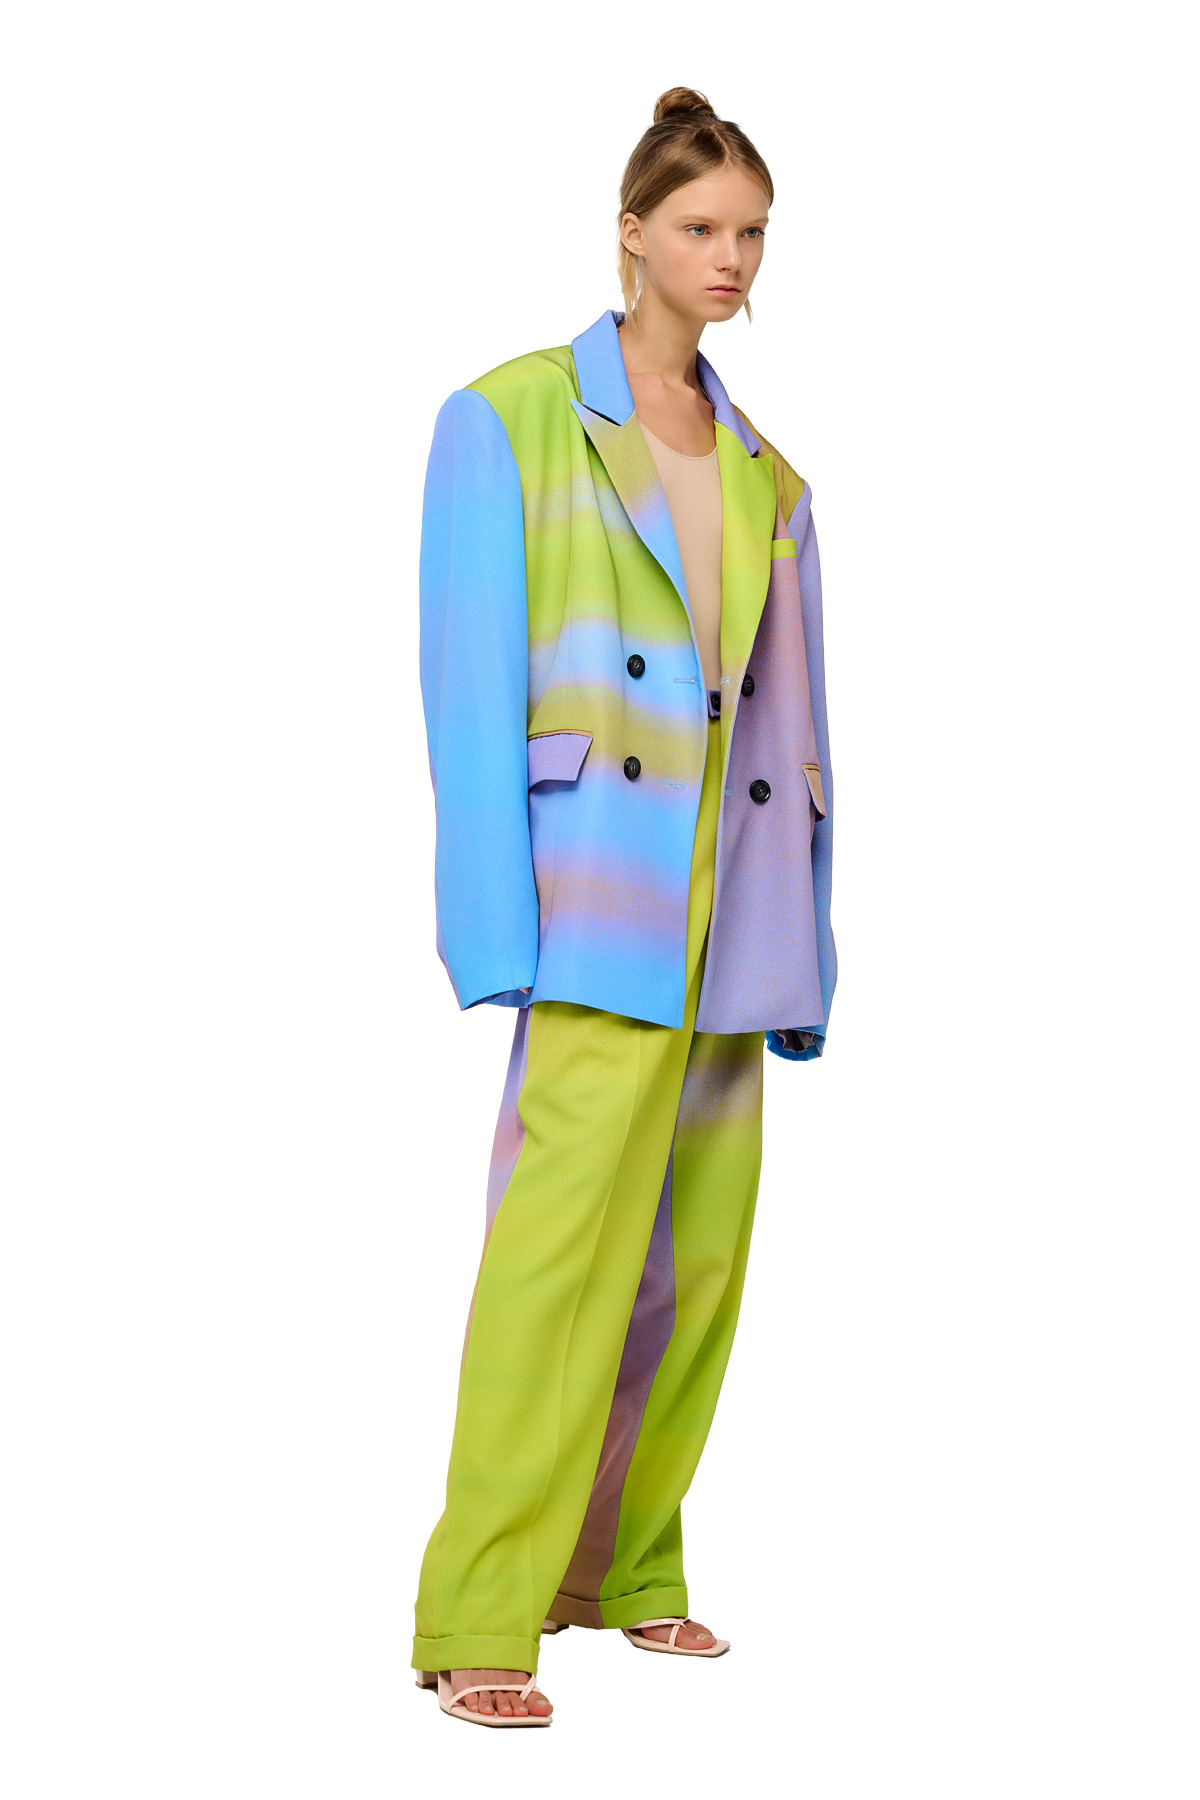 Berhasm double-breasted blazer with Yellow sunrise print